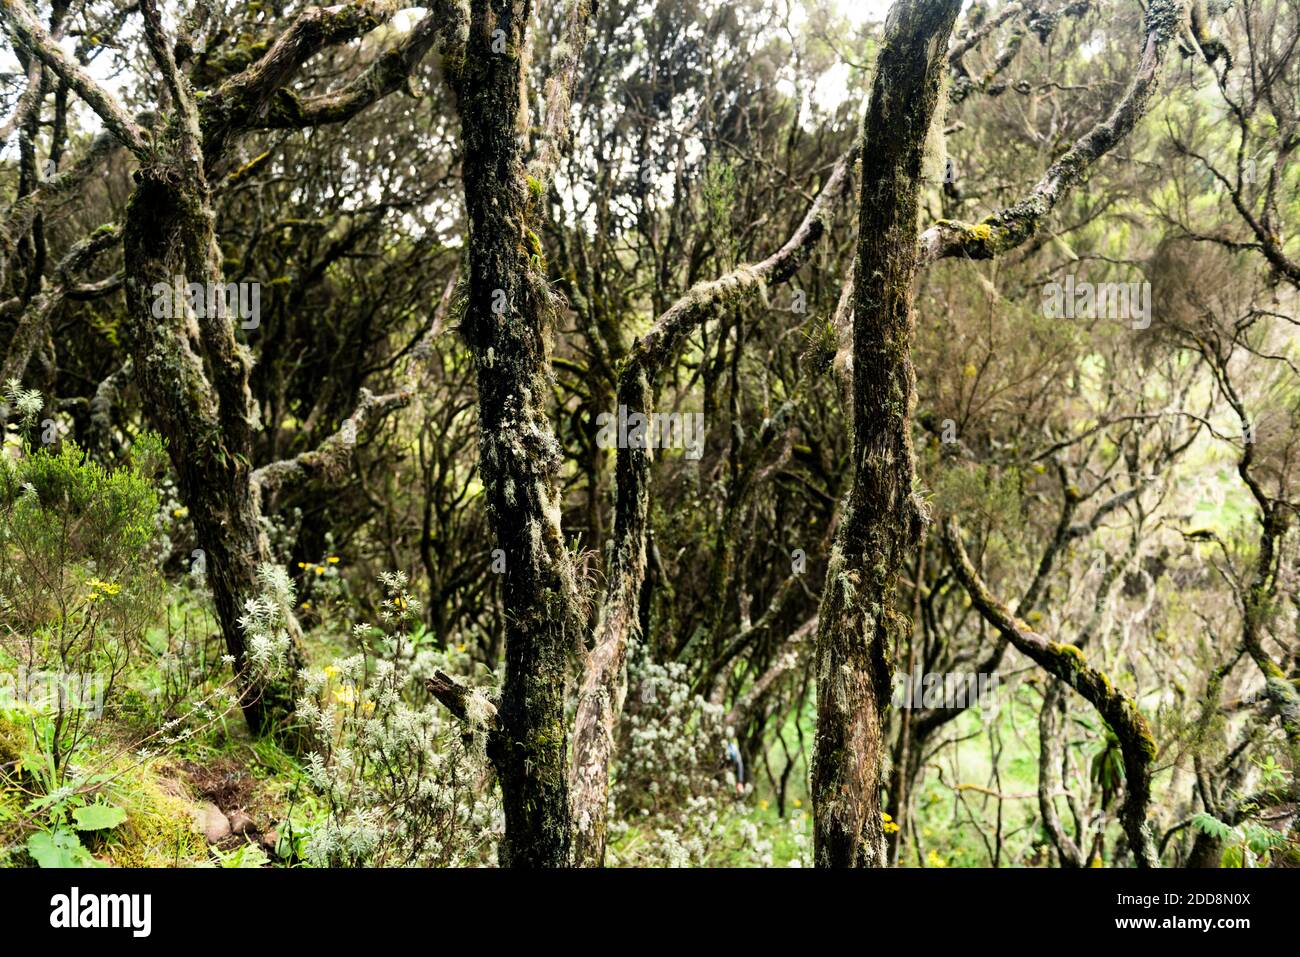 Giant Heather Forest in Aberdare National Park, Kenya Stock Photo